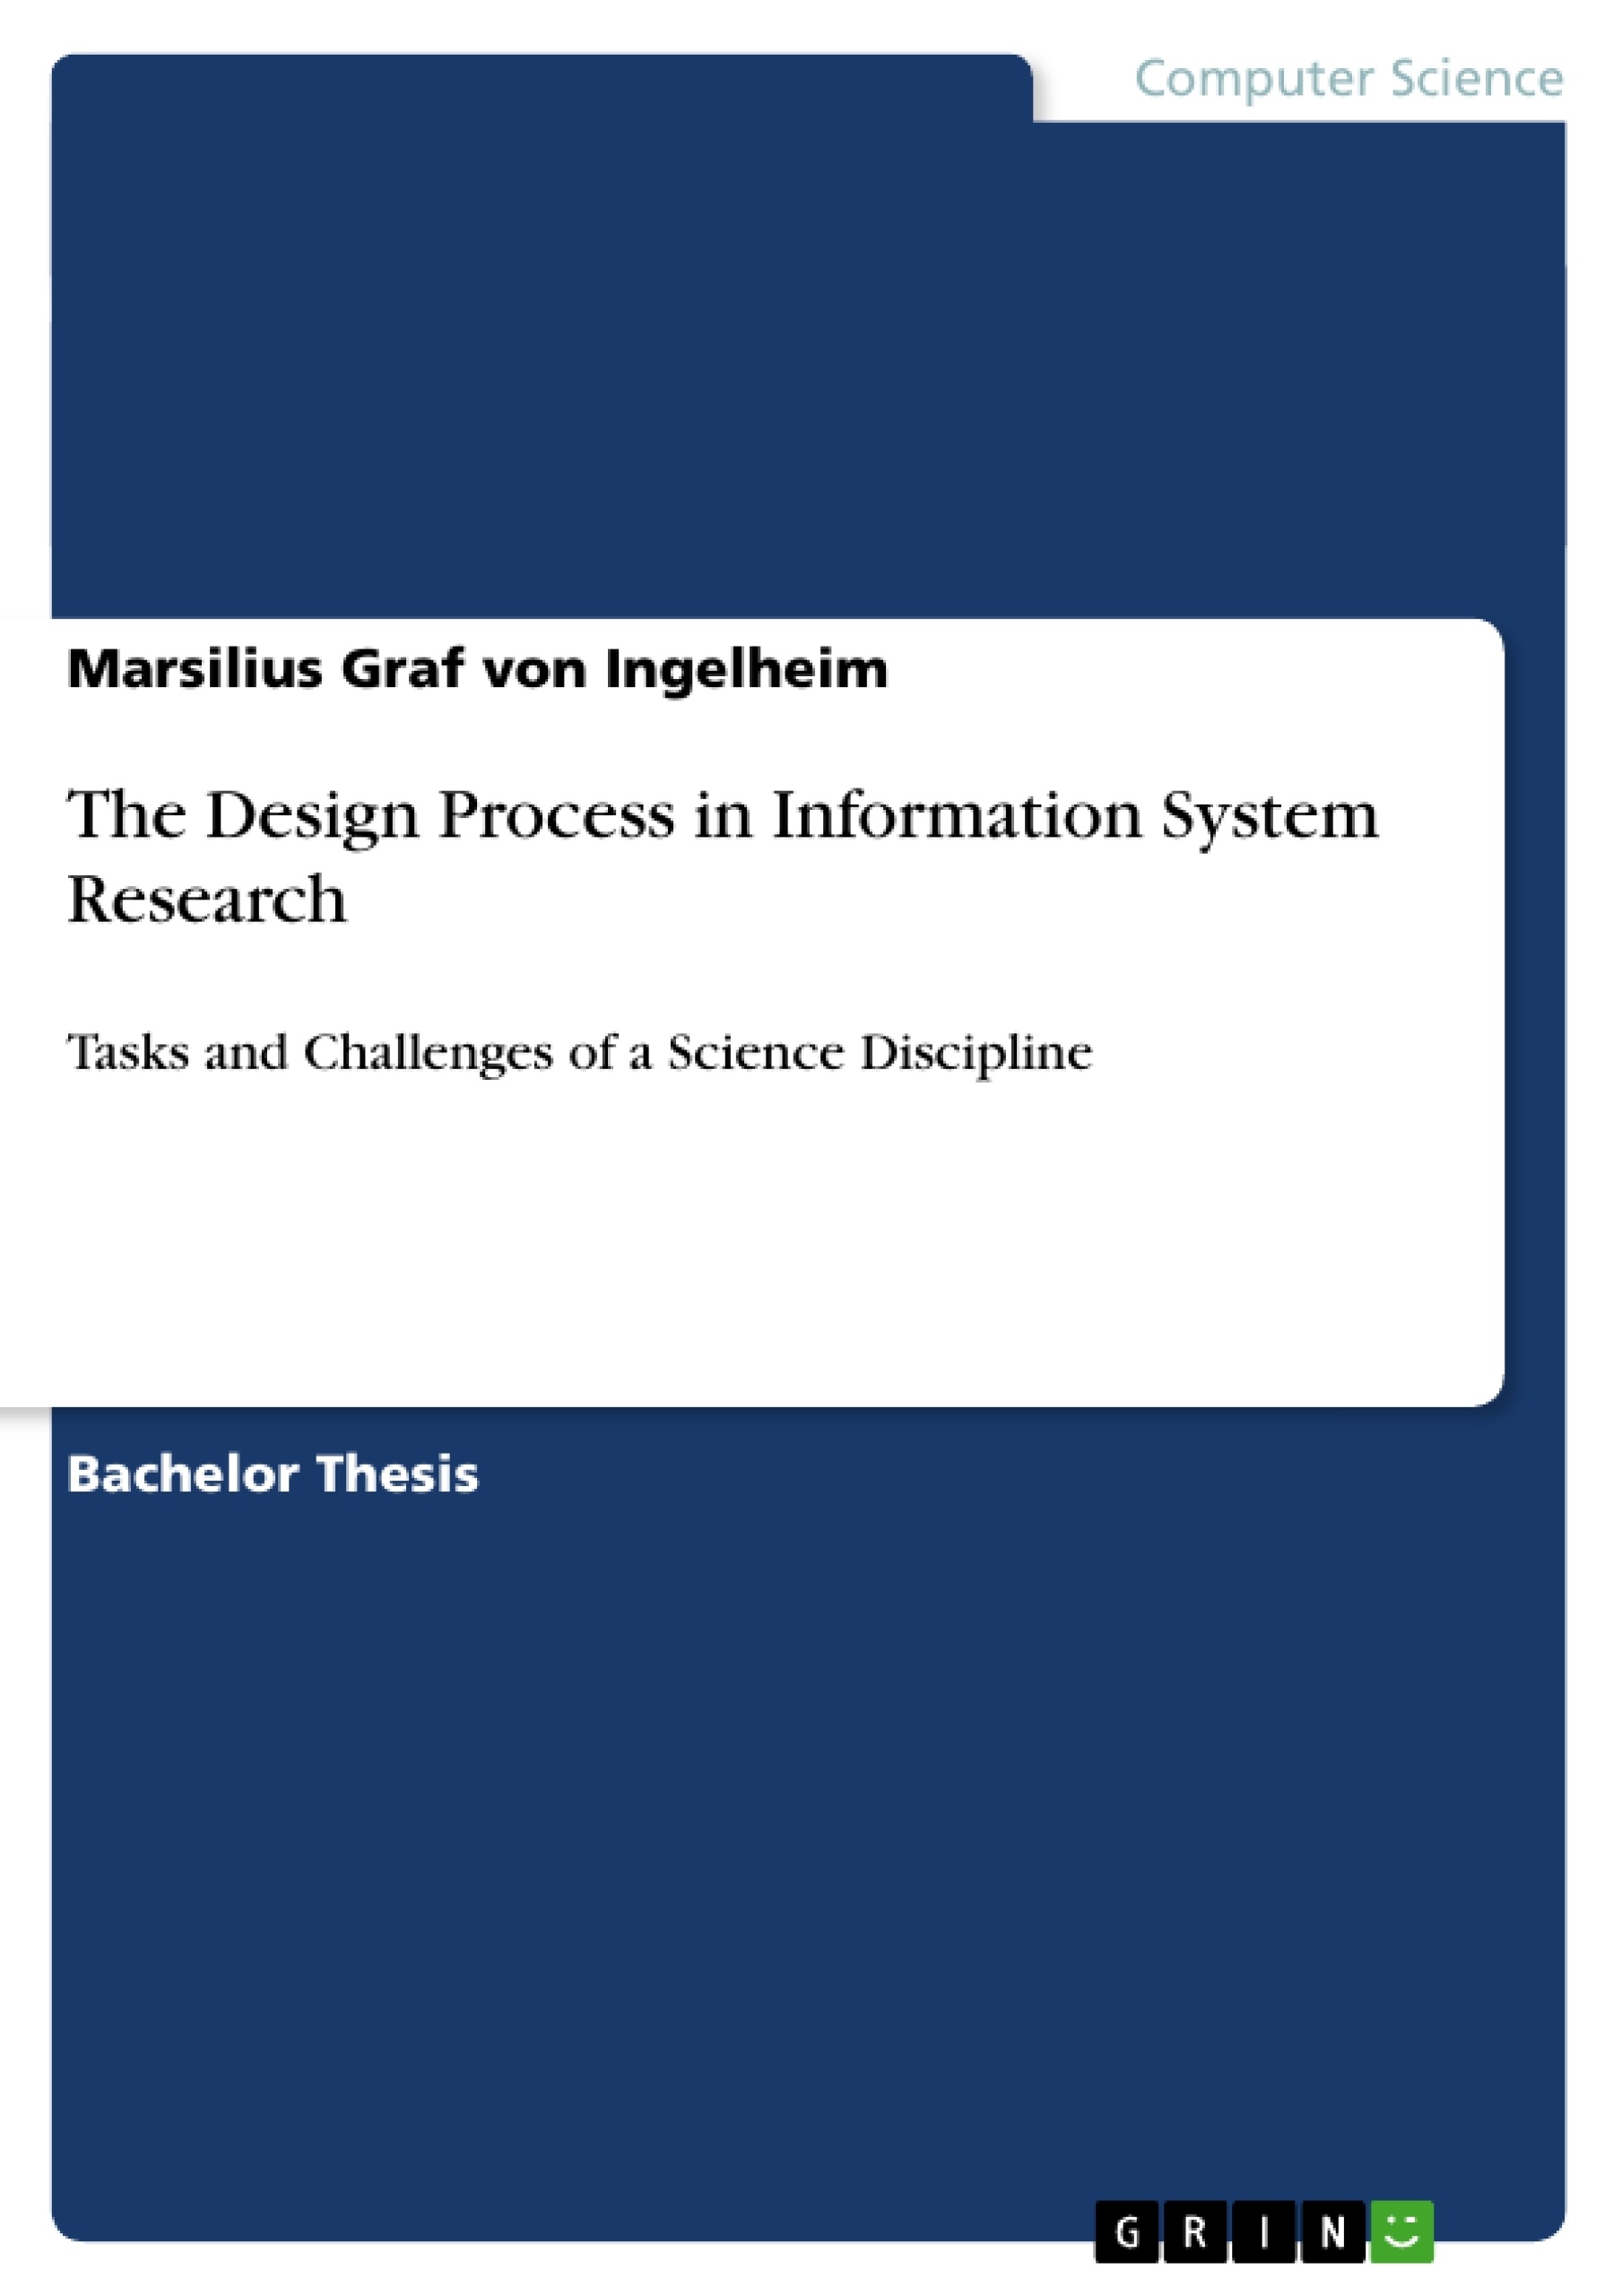 Title: The Design Process in Information System Research